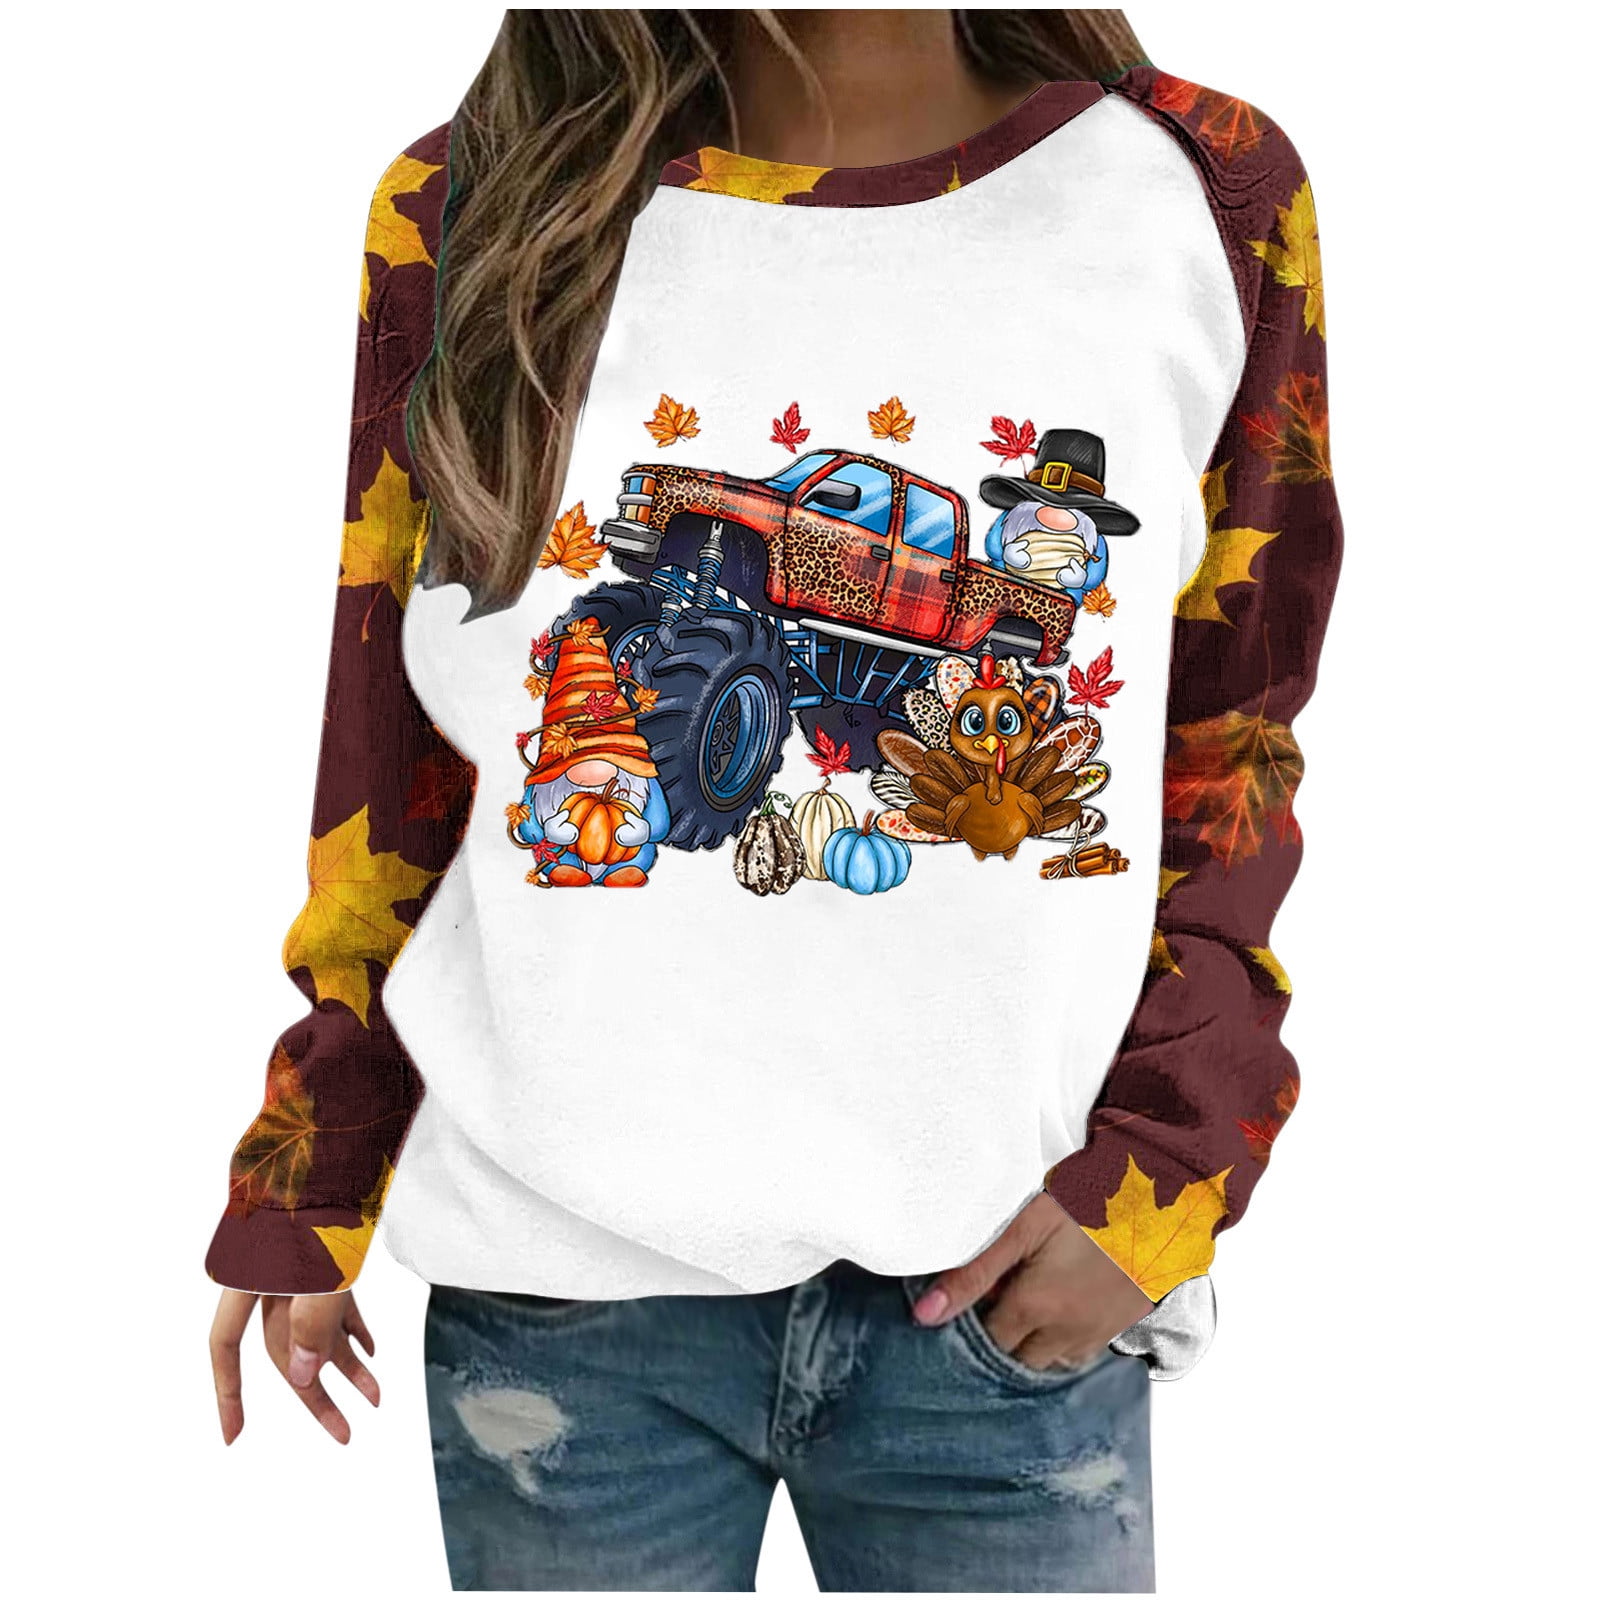 Dyegold Halloween Sweaters Teen Girls Cute Funny Graphic Shirt